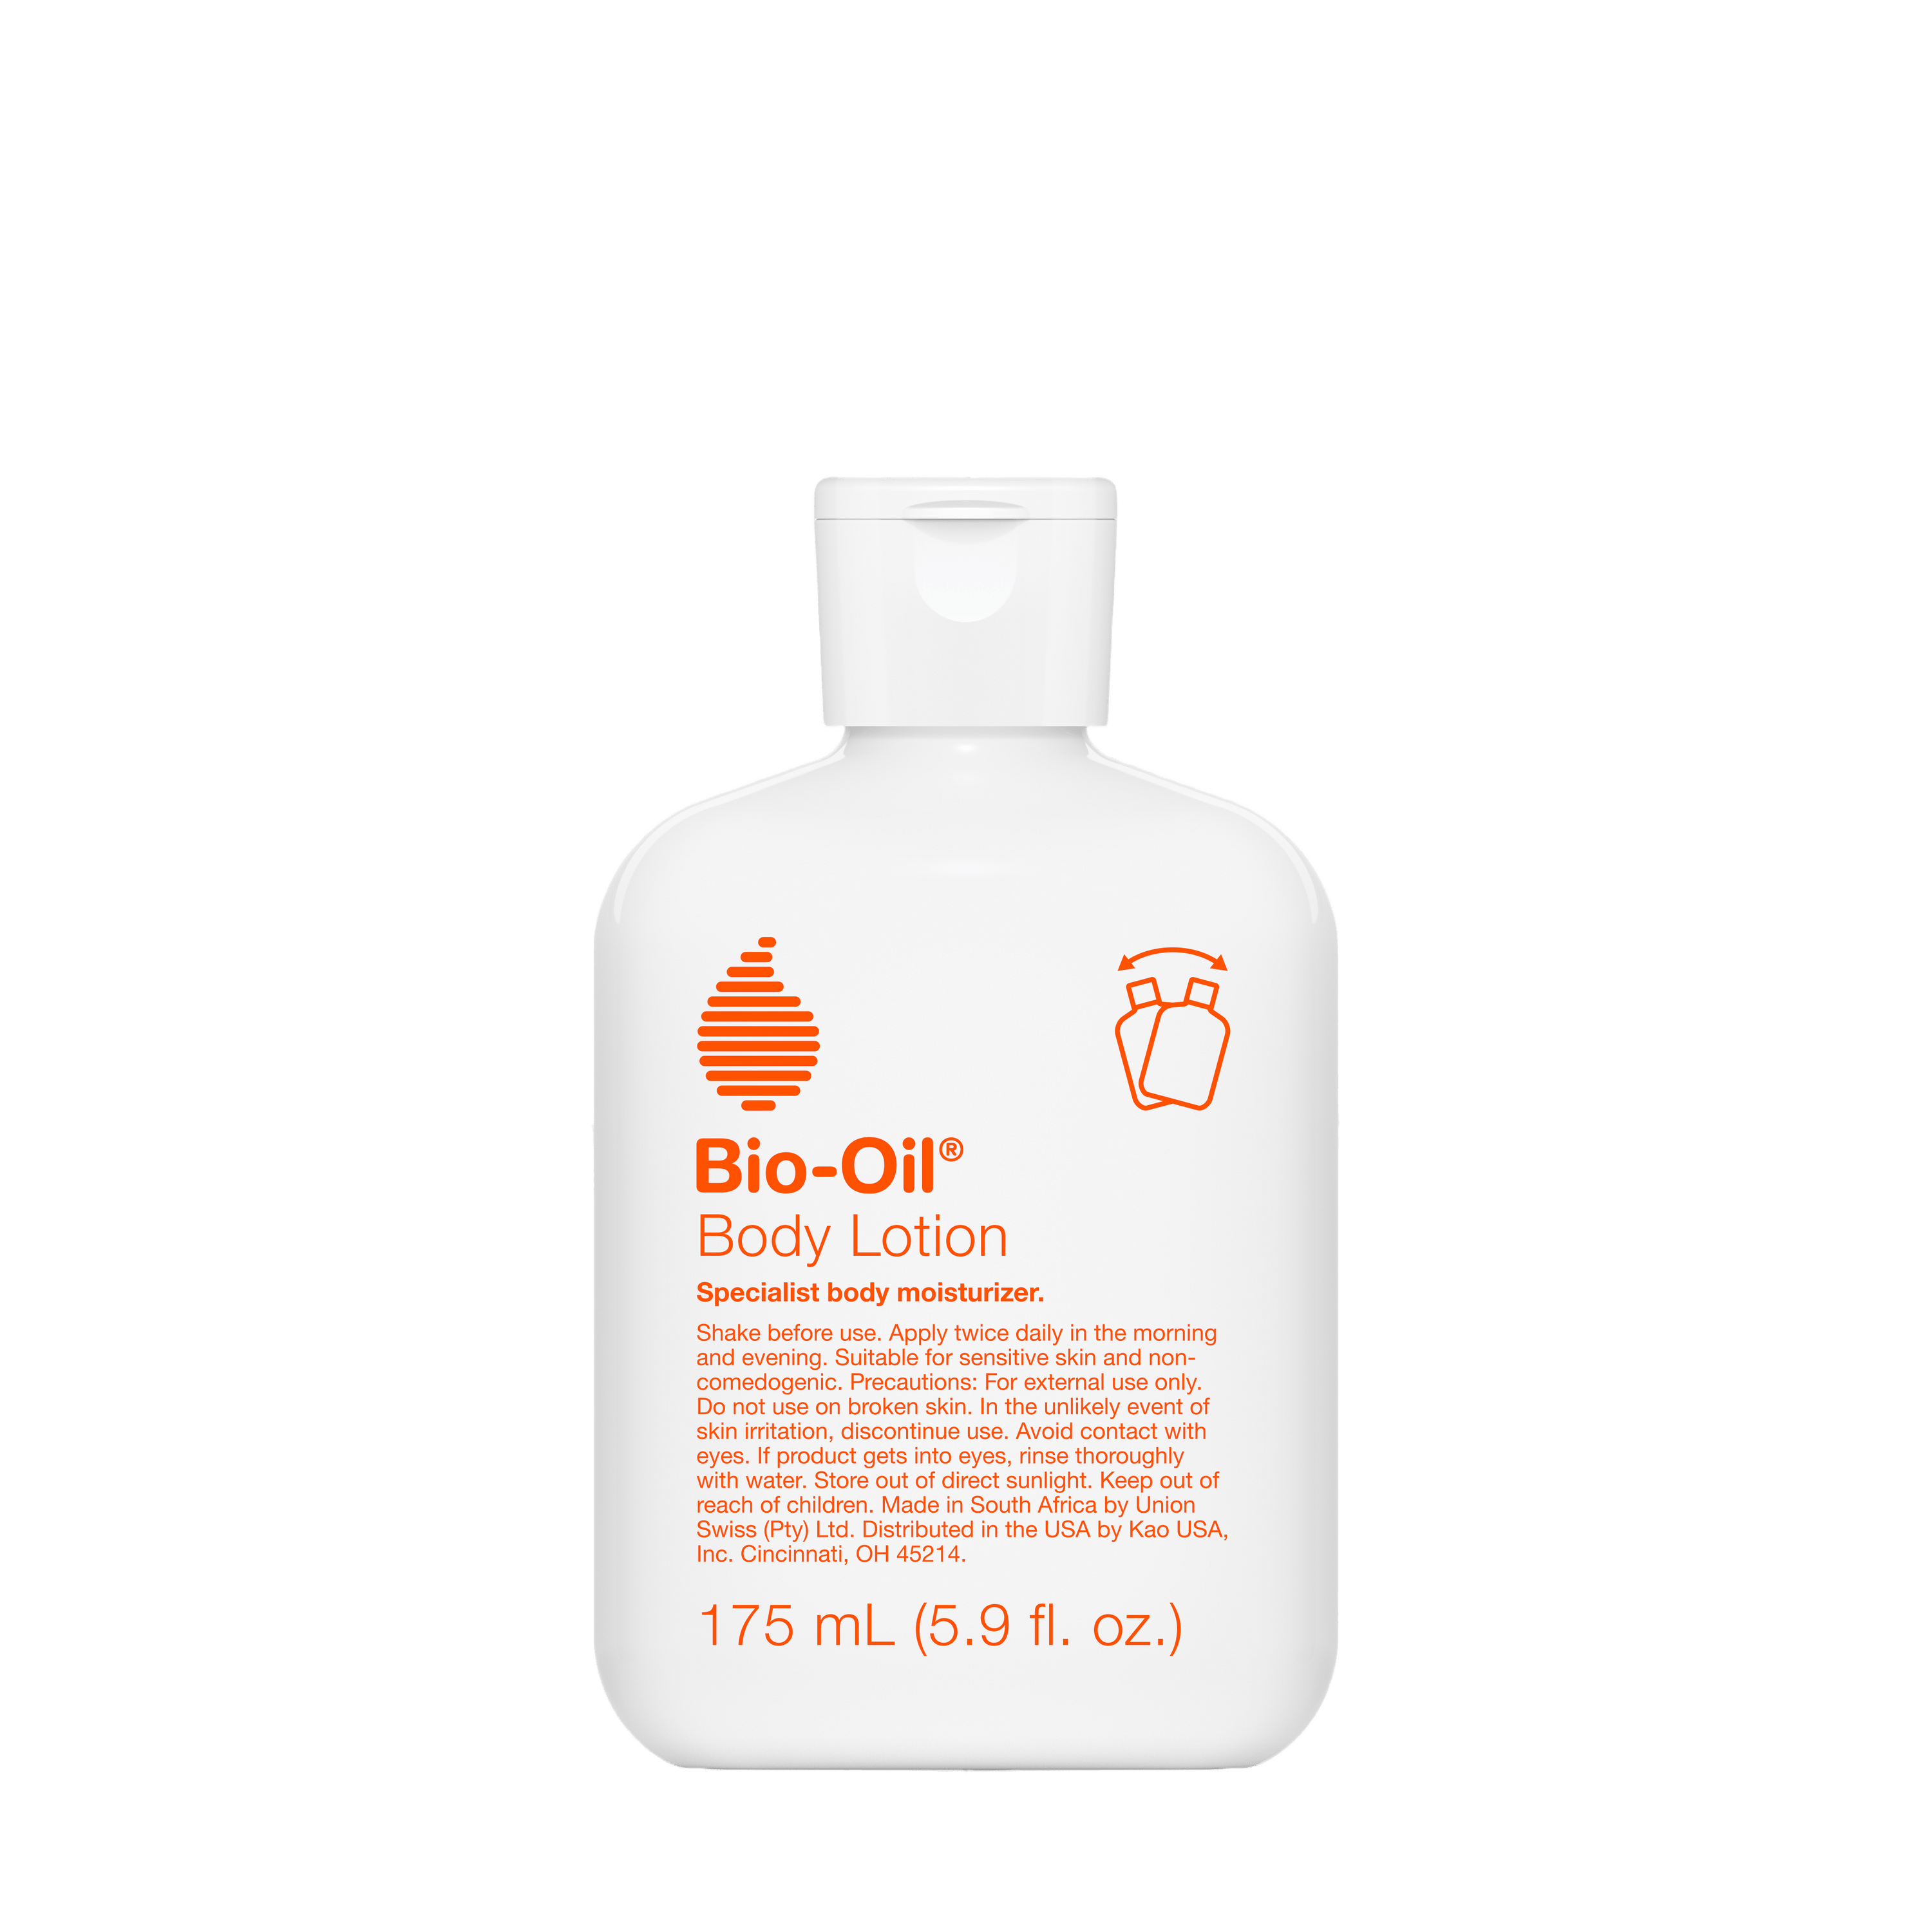 I Tried The New Bio-Oil Lotion And It's Worth The Hype